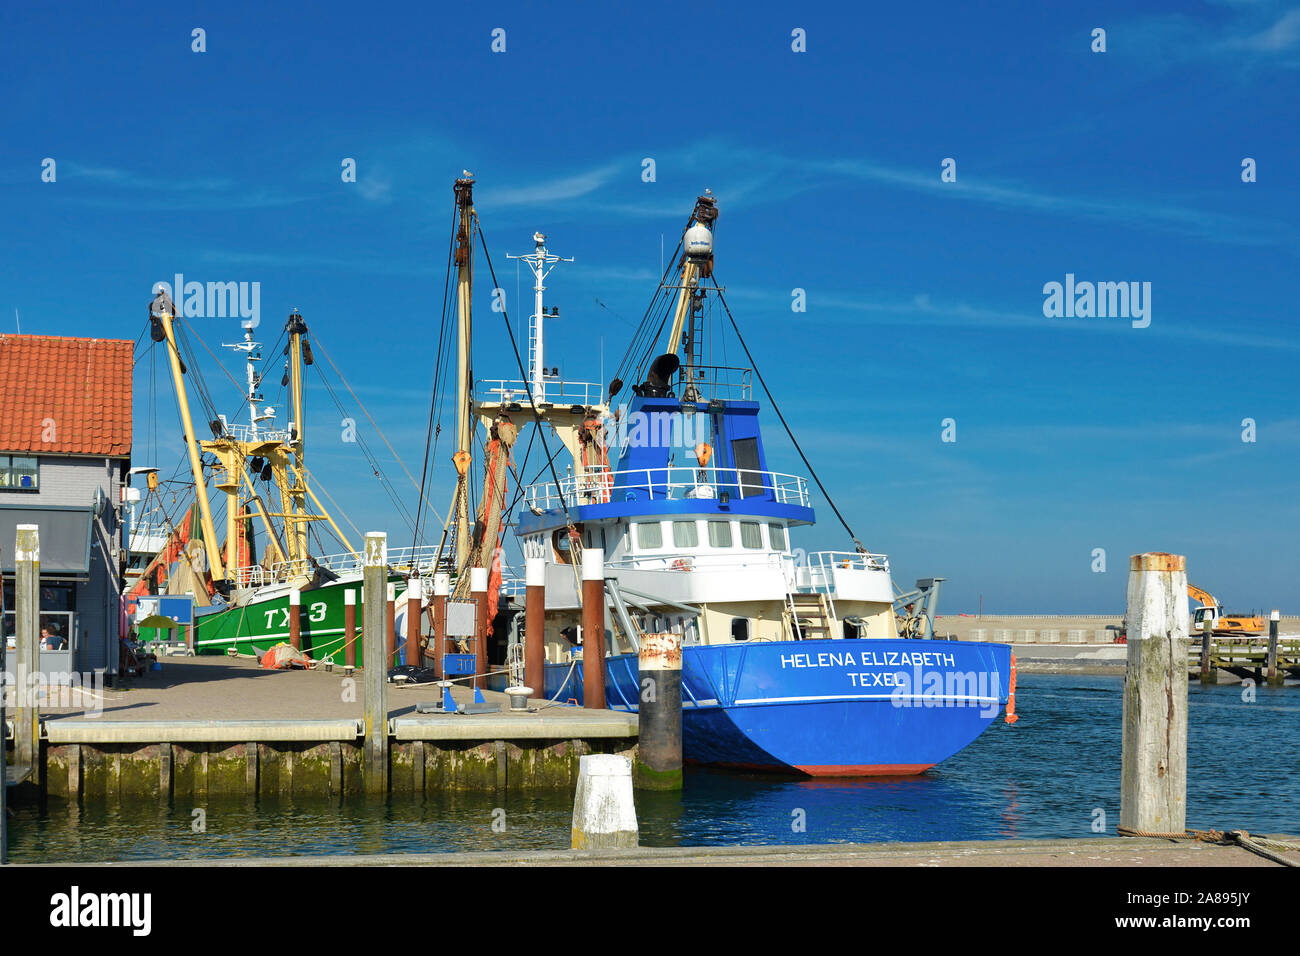 Dutch cutter boat with bottom trawling fishing nets called 'Helena Elizabeth Texel' anchored in Oudenshild harbor on island Texel Stock Photo